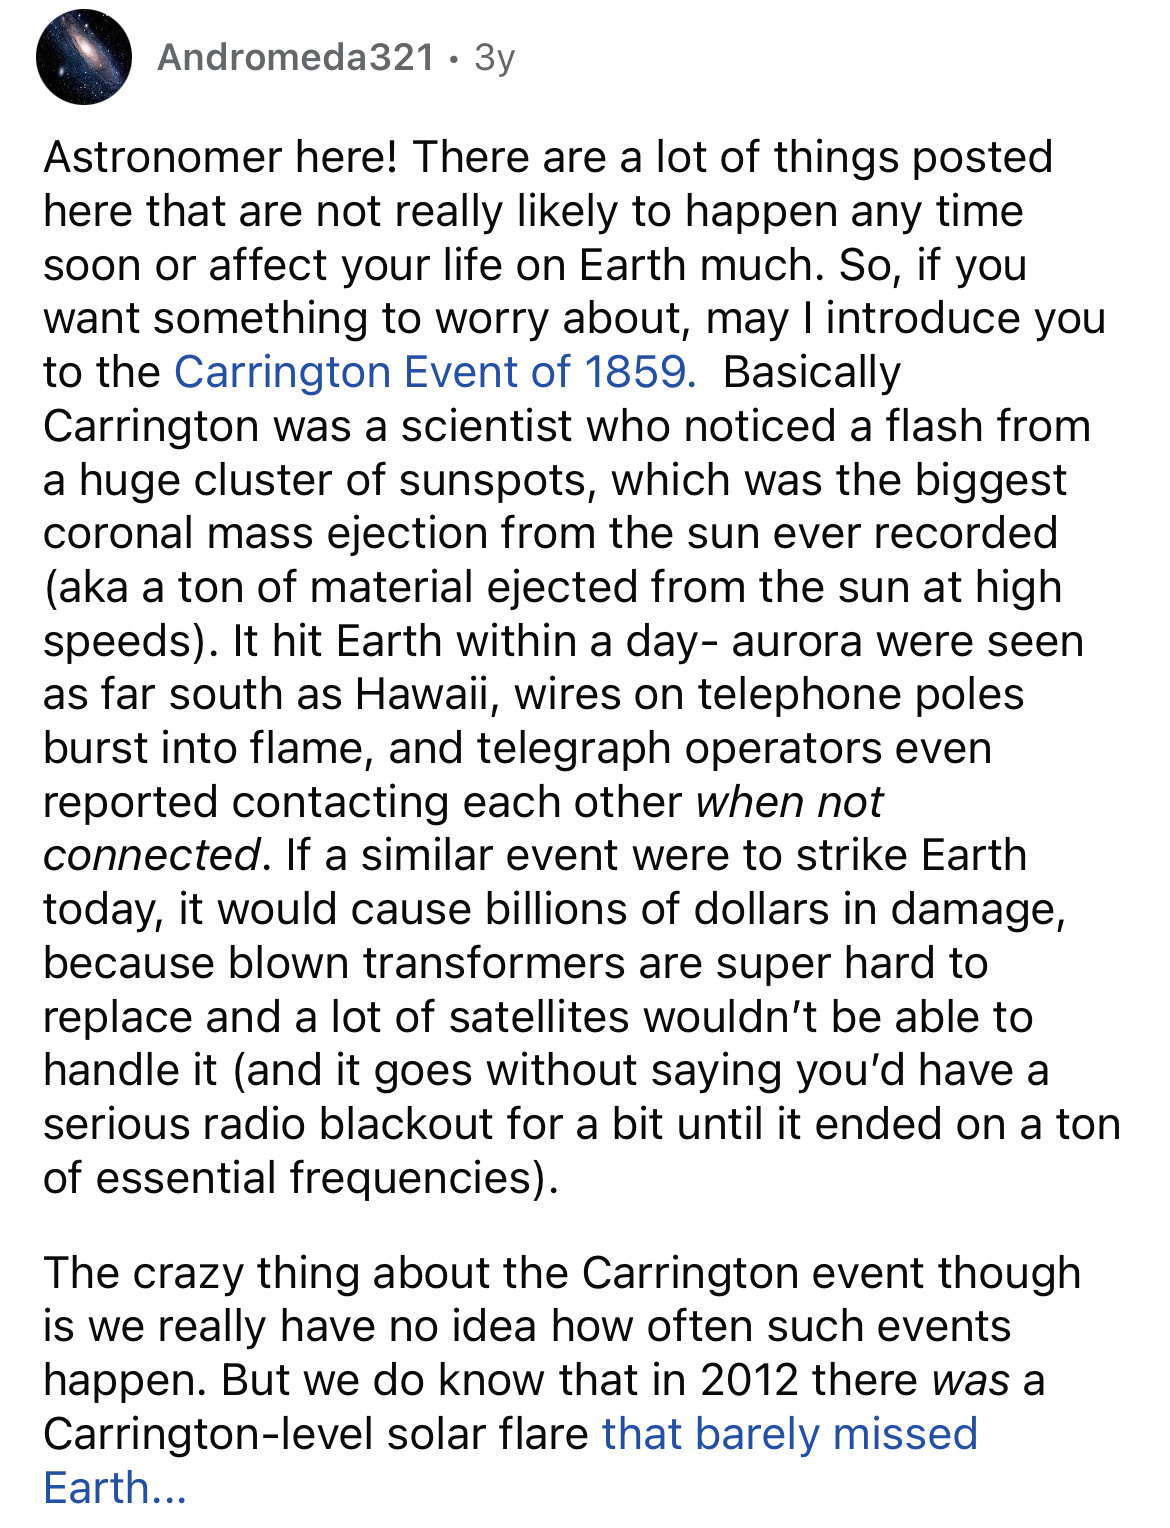 document - Andromeda321.3y Astronomer here! There are a lot of things posted here that are not really ly to happen any time soon or affect your life on Earth much. So, if you want something to worry about, may I introduce you to the Carrington Event of 18